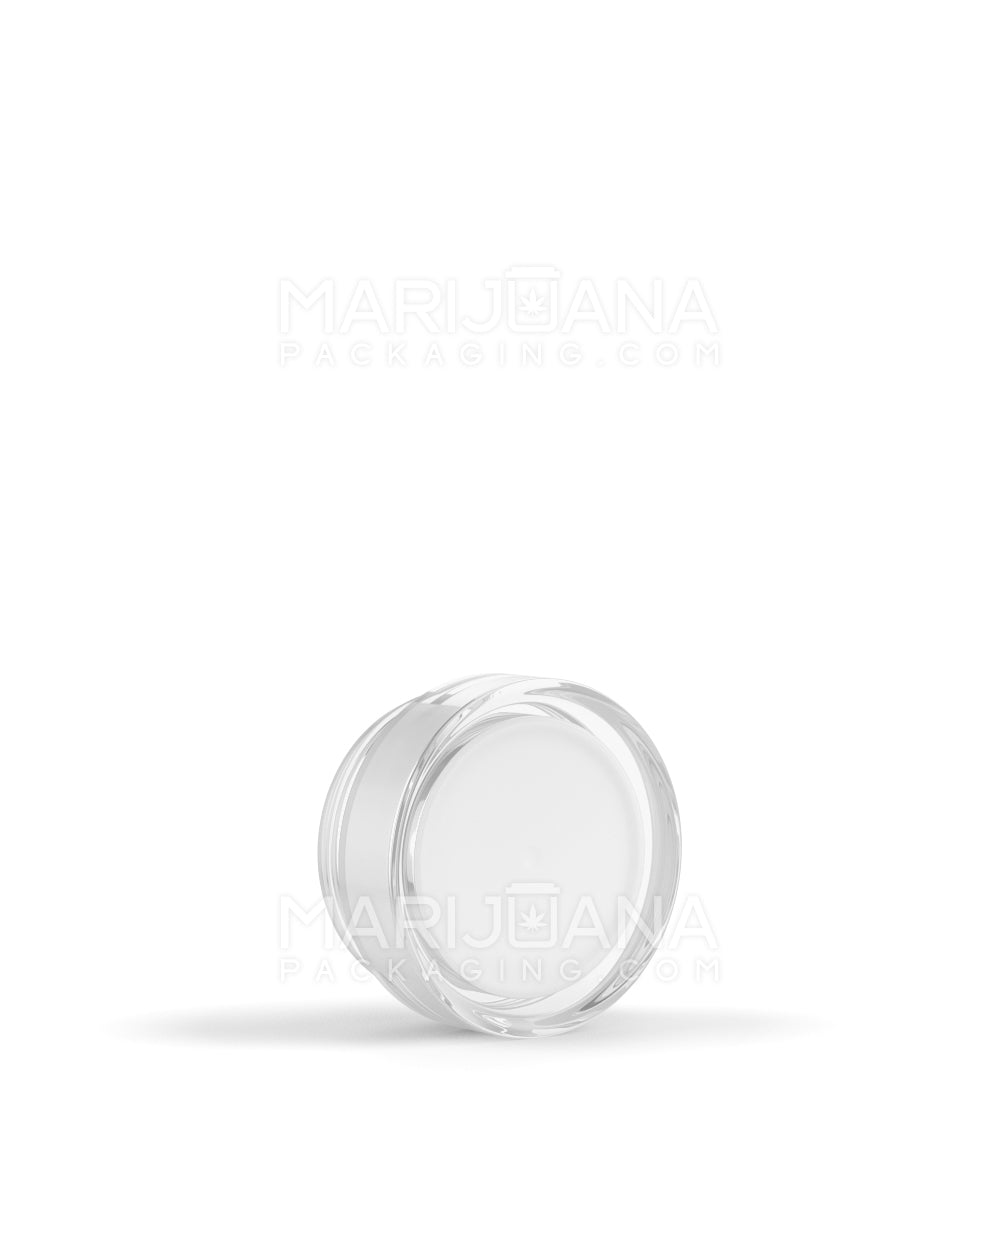 Clear Concentrate Containers w/ Screw Top Cap & White Silicone Insert | 5mL - Plastic - 100 Count - 9